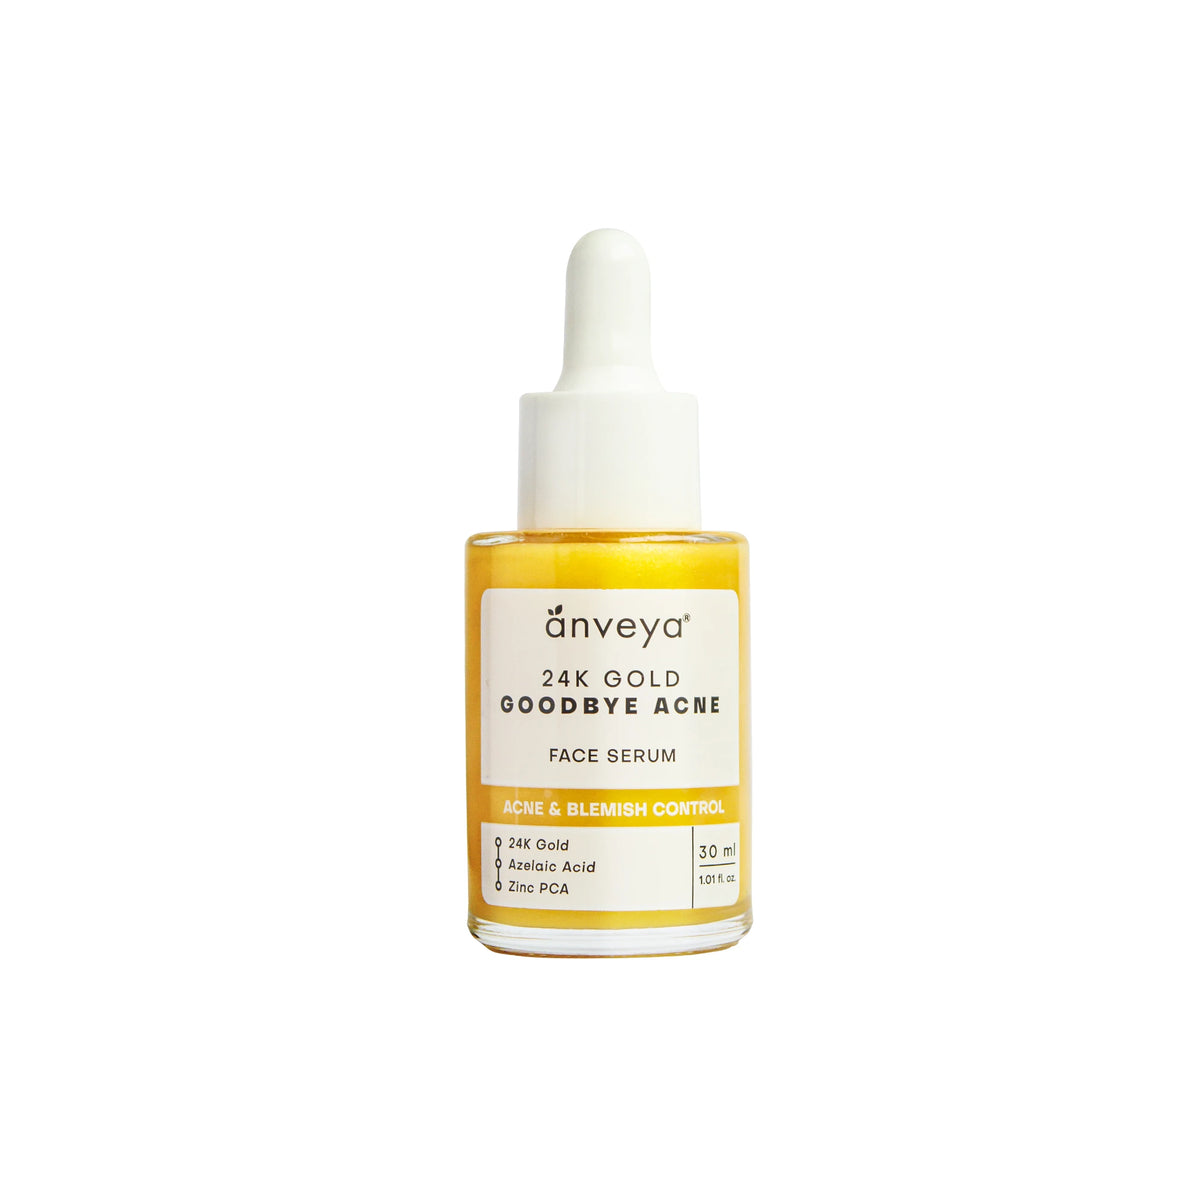 Anveya Goodbye Acne Serum, 30ml For All Skin Types | 24K Gold Serum | Remove Acne Scars, Pimple Marks & Pore Tightening